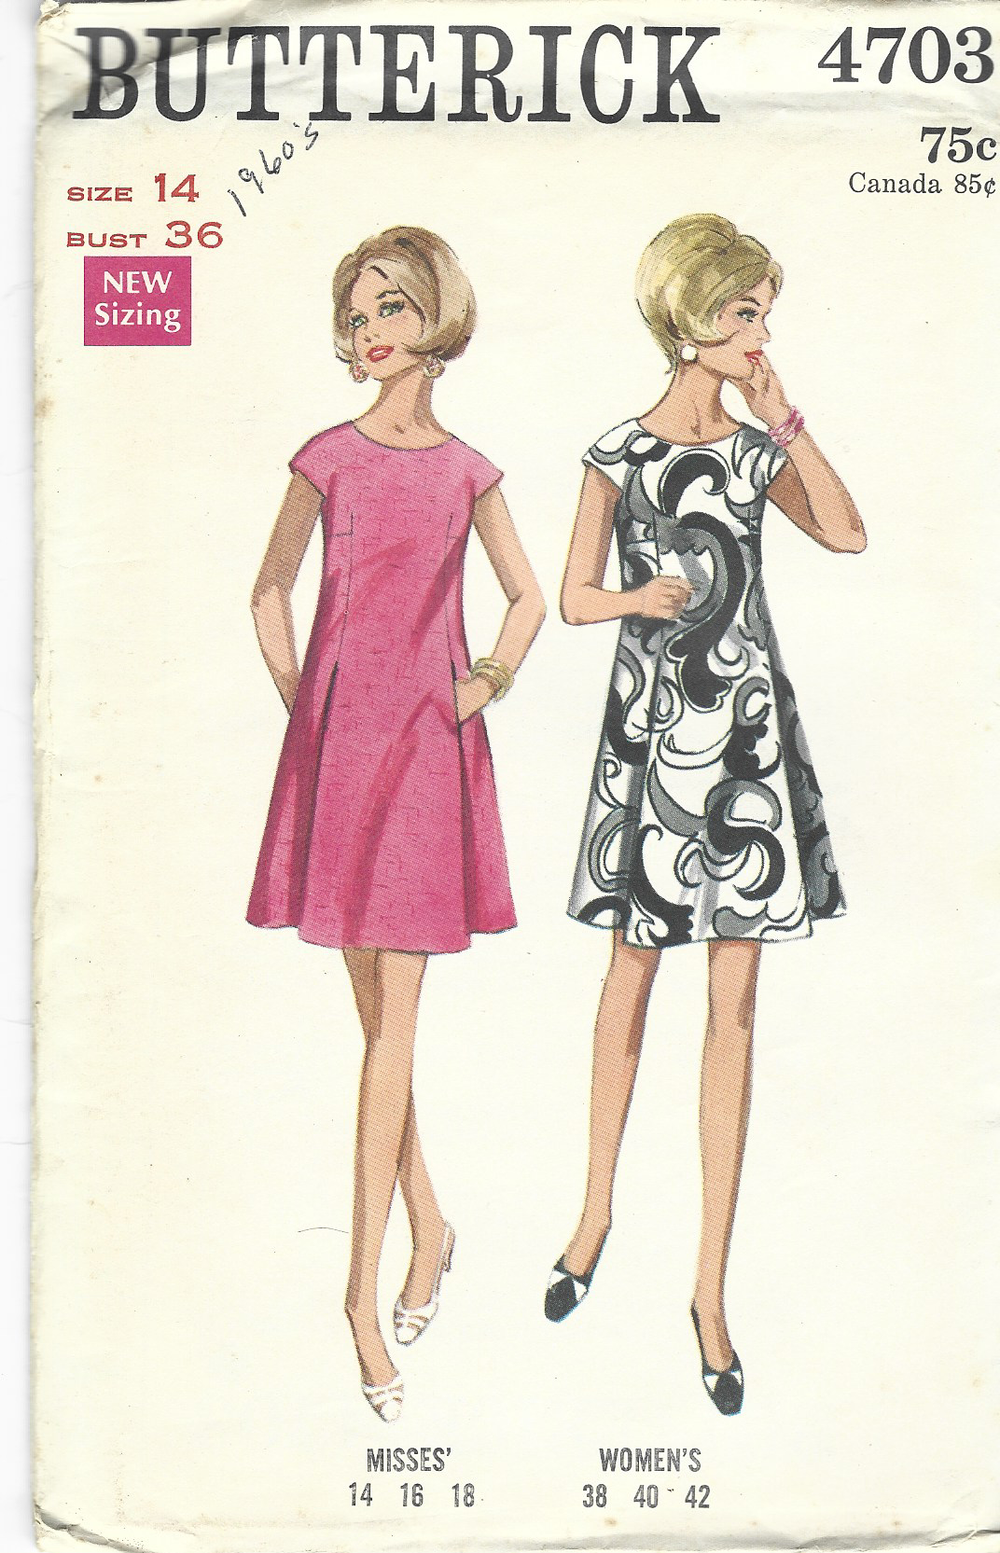 Butterick 4703 Ladies One Piece Dress Vintage Sewing Pattern 1960s